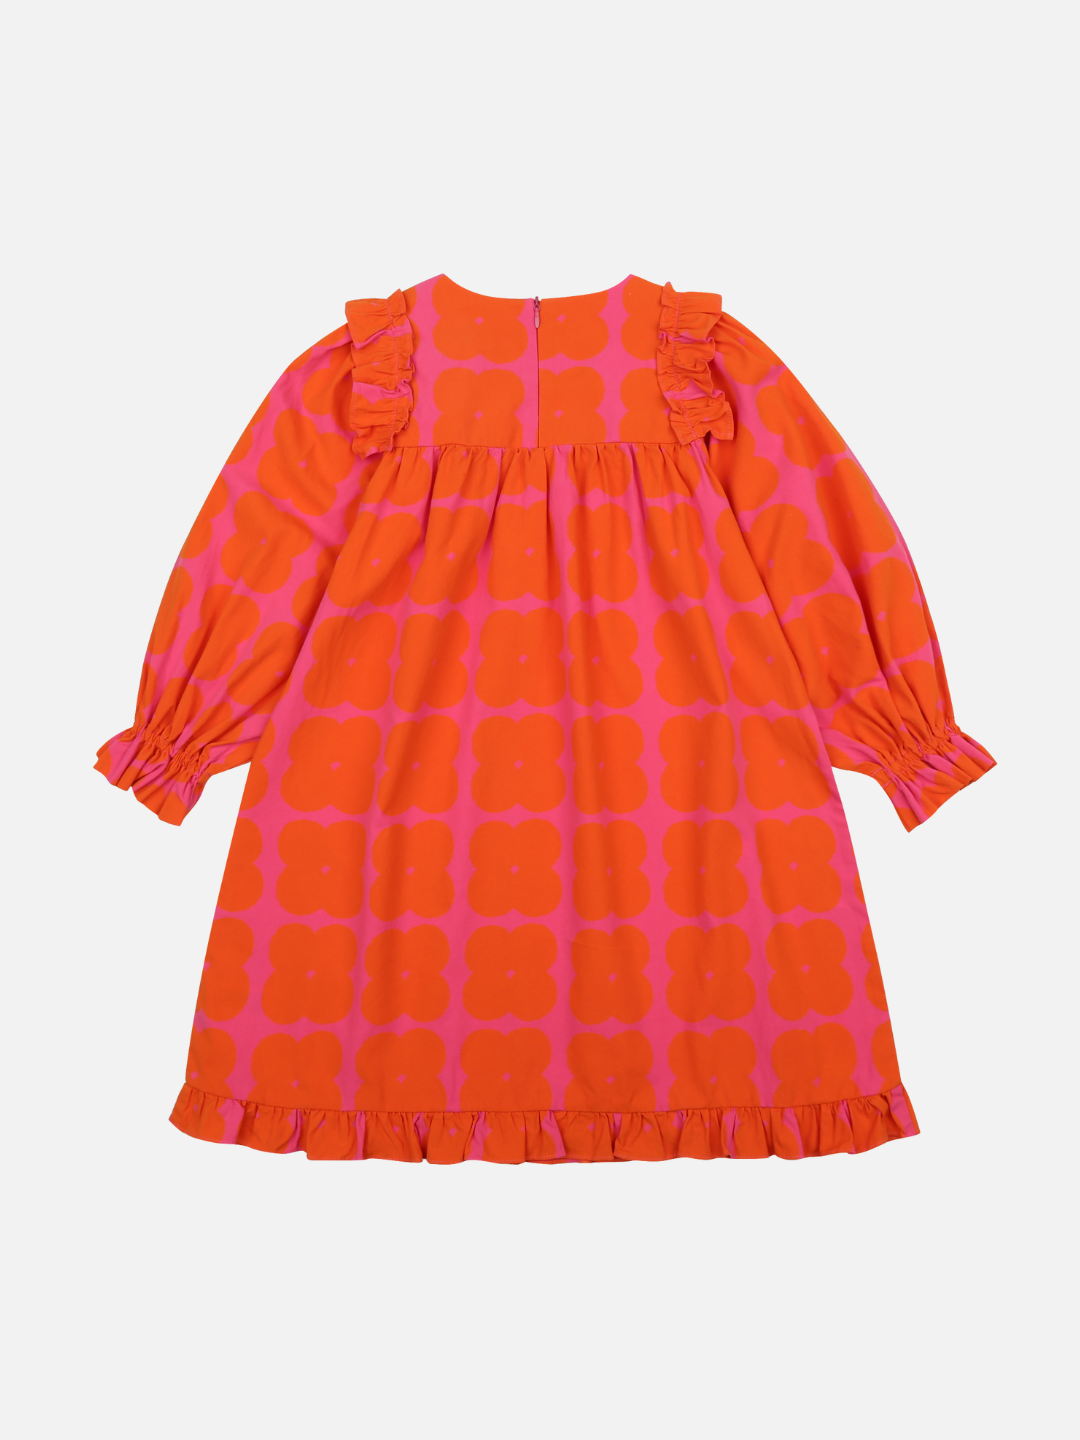 Back of Clover Dress. Bright red and pink dress with a ruffled hem, sleeves, and collar with a zipper in the back.